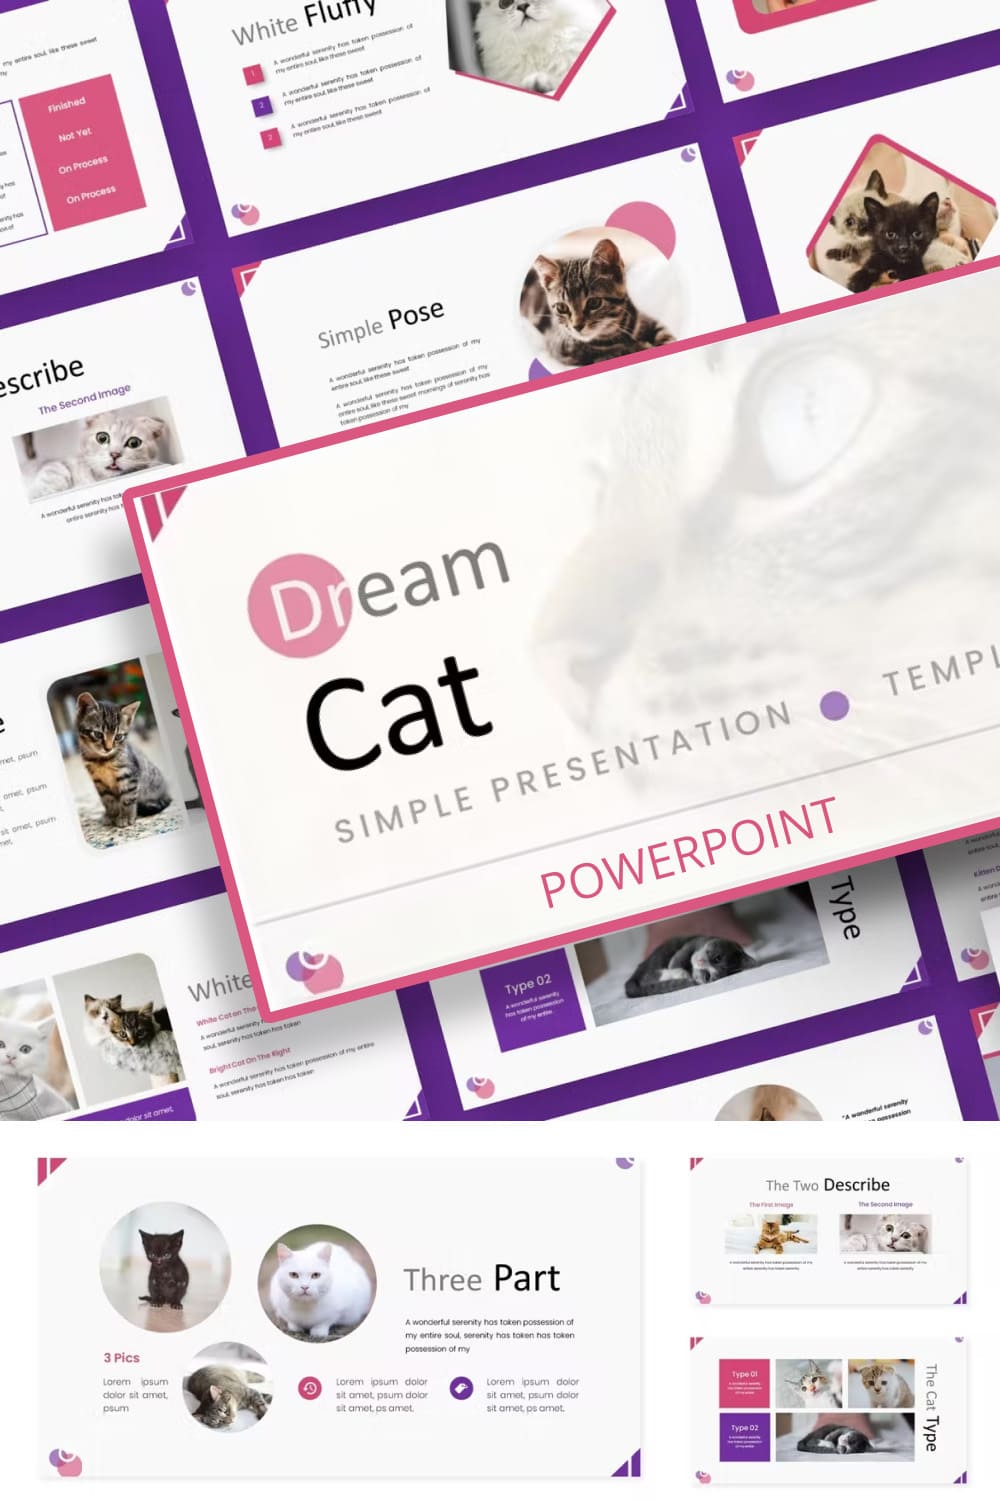 Dream cat powerpoint template - pinterest image preview.